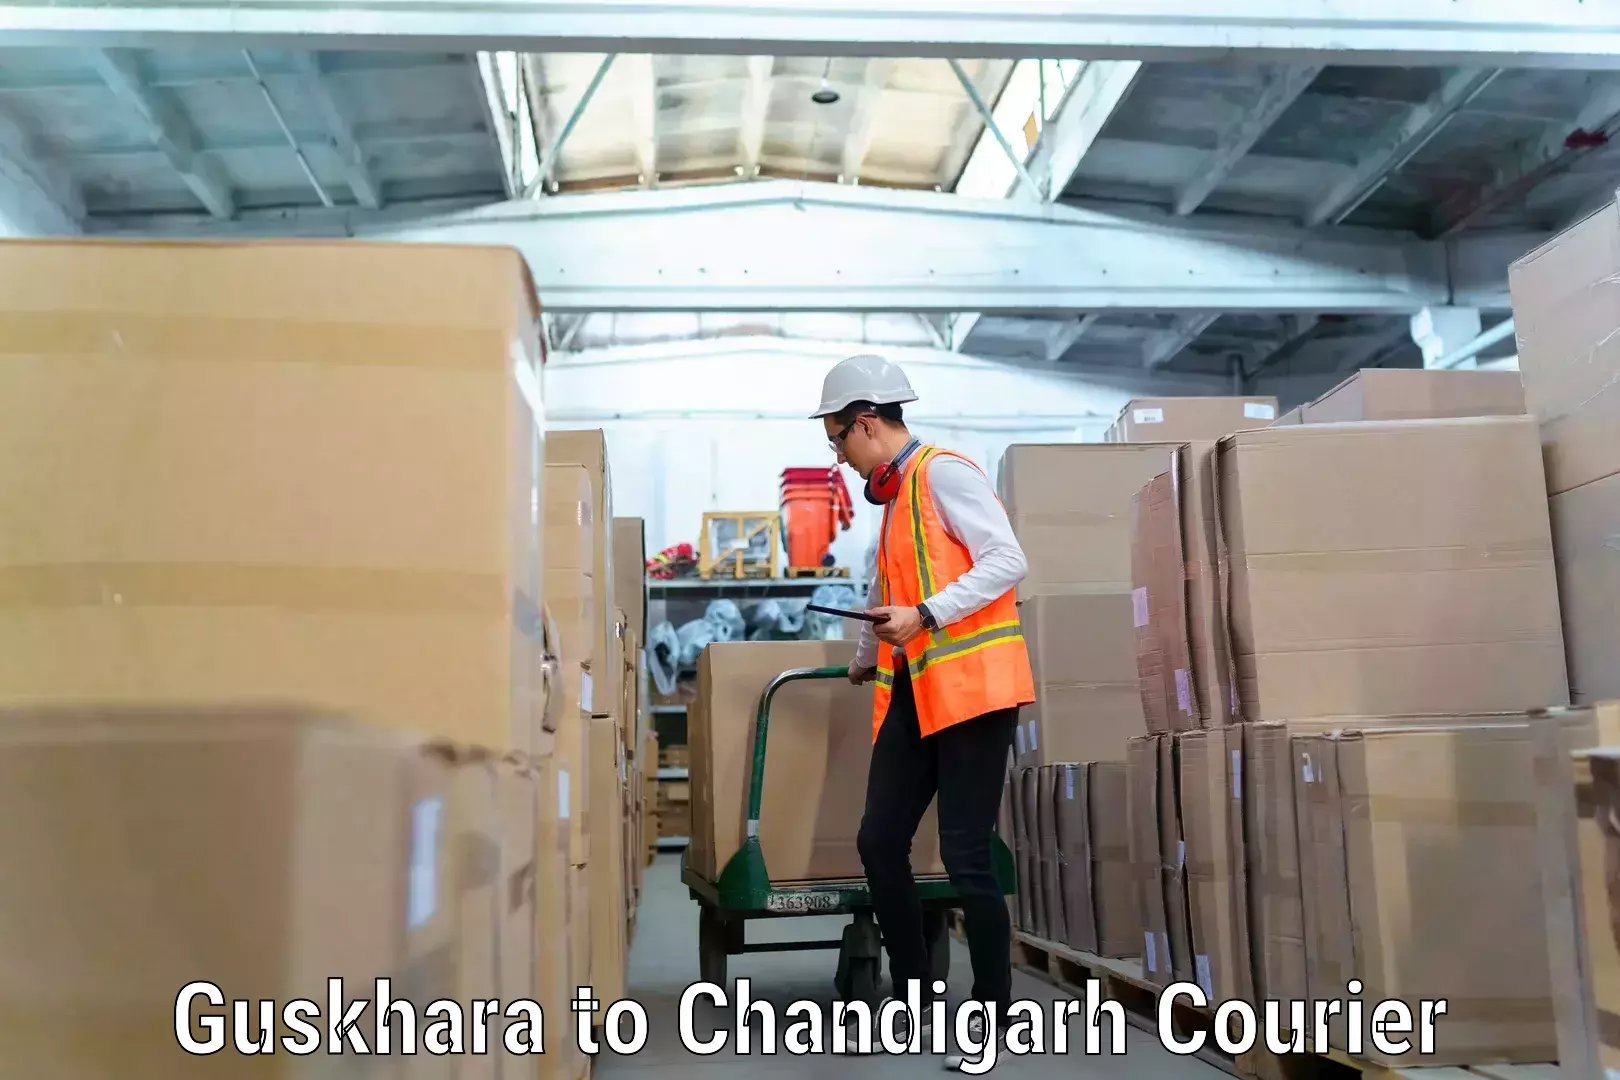 Furniture moving assistance Guskhara to Chandigarh